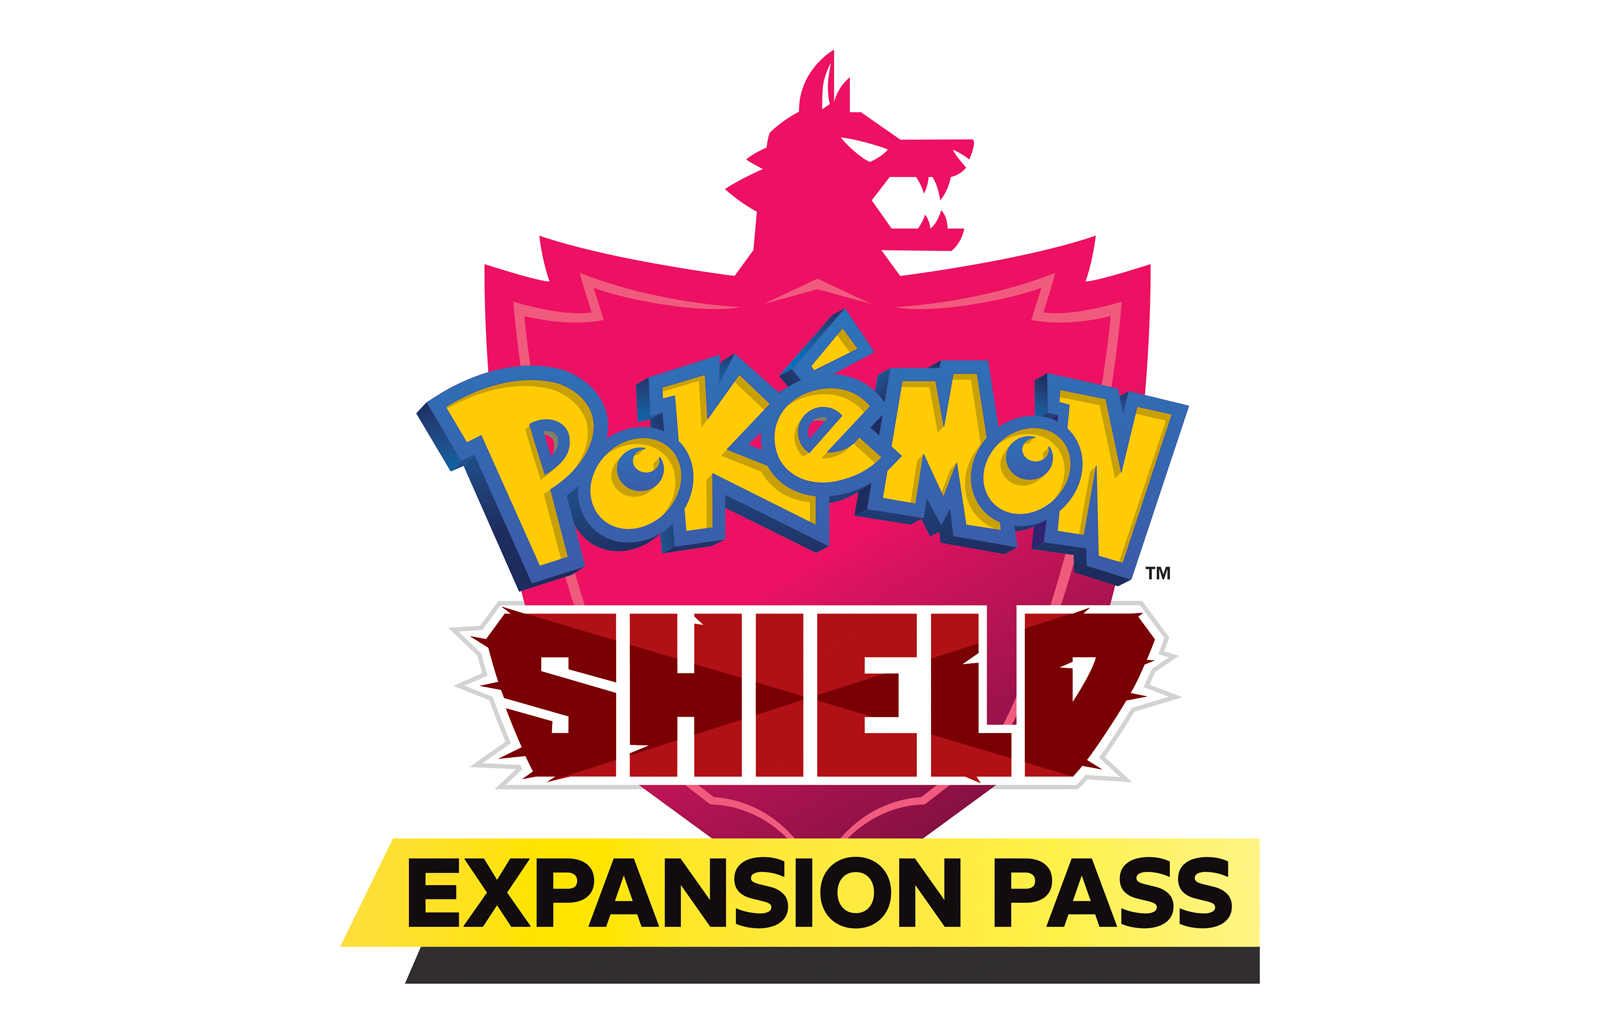 Pokemon Sword and Shield - Official Expansion Pass Trailer 